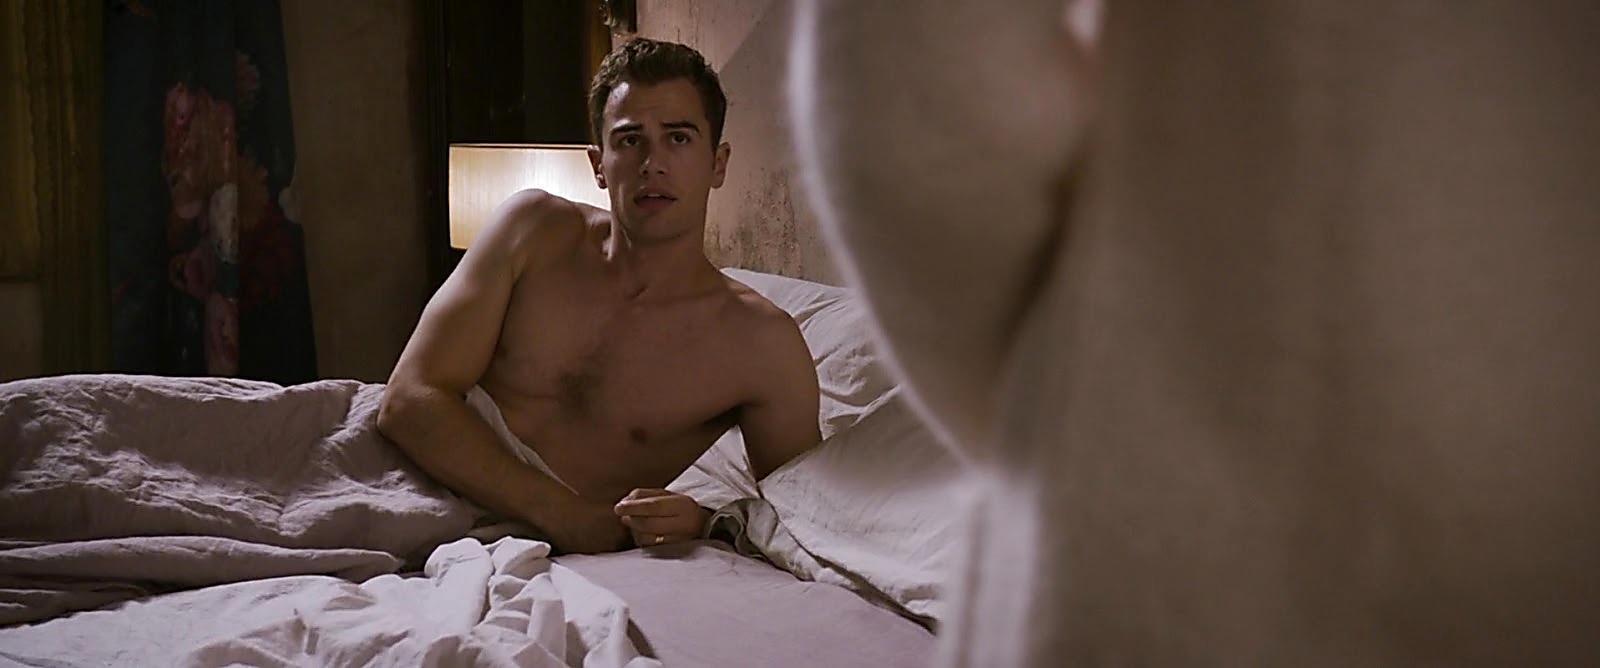 Theo James Official Site for Man Crush Monday #MCM Woman Cru